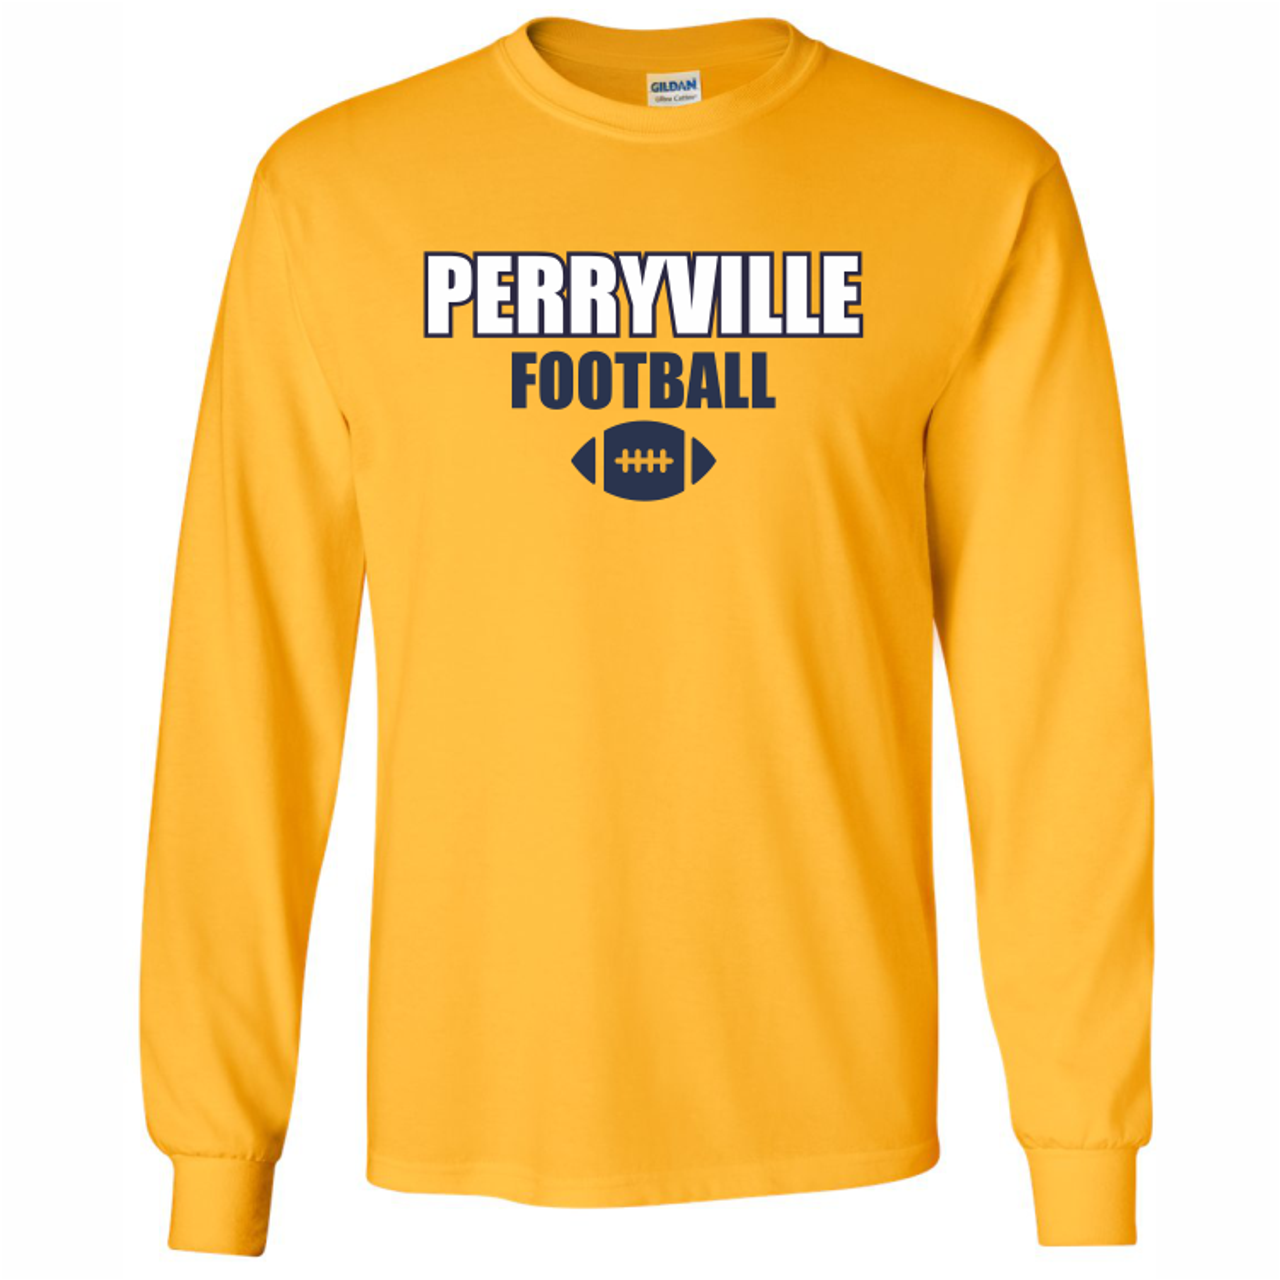 Perryville MS Football T-Shirt, Gold